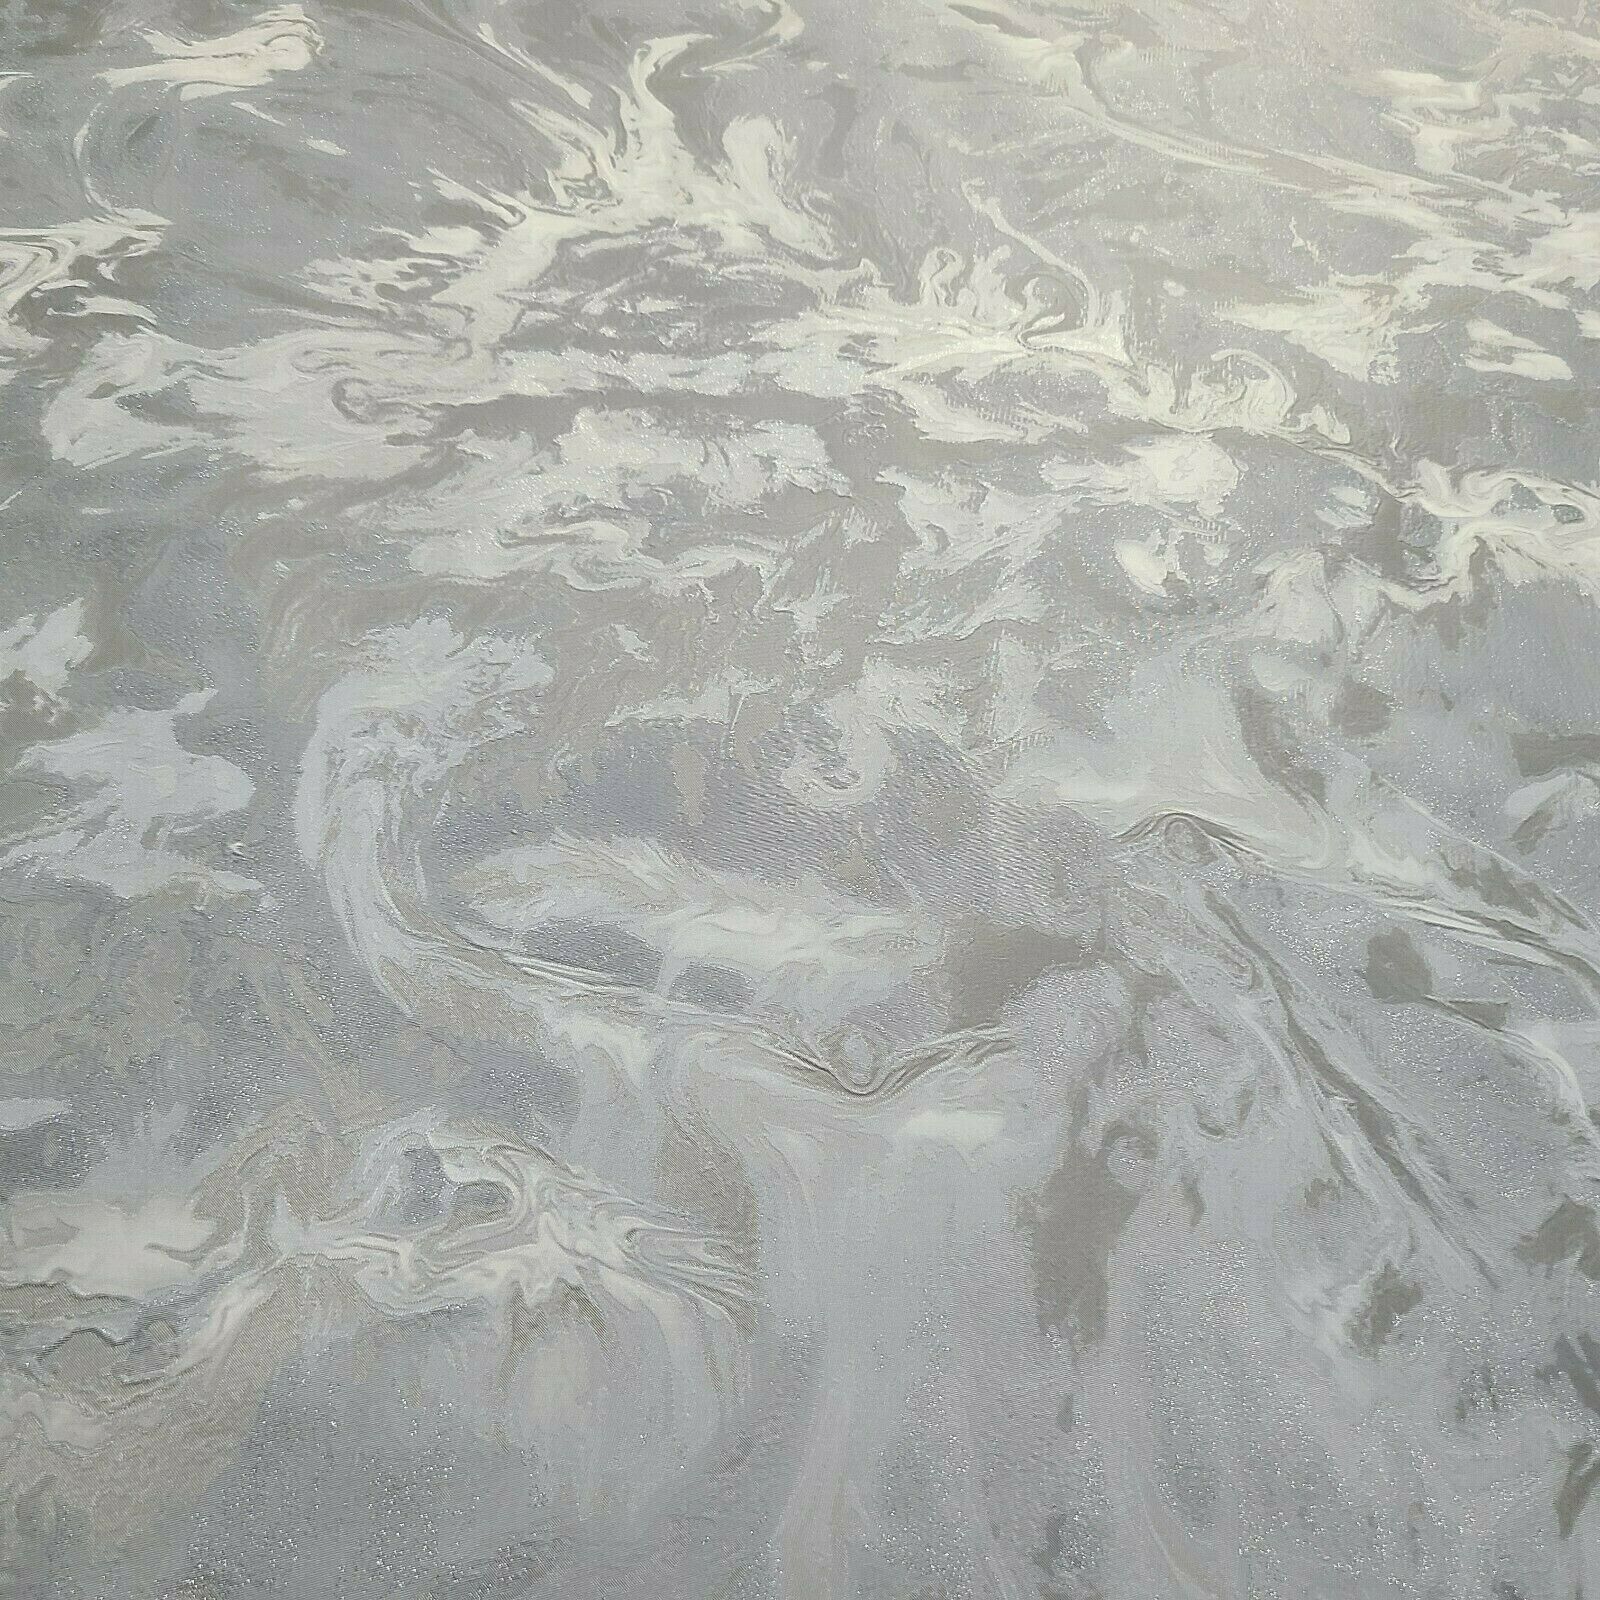 A painting of water with waves and birds - Silver